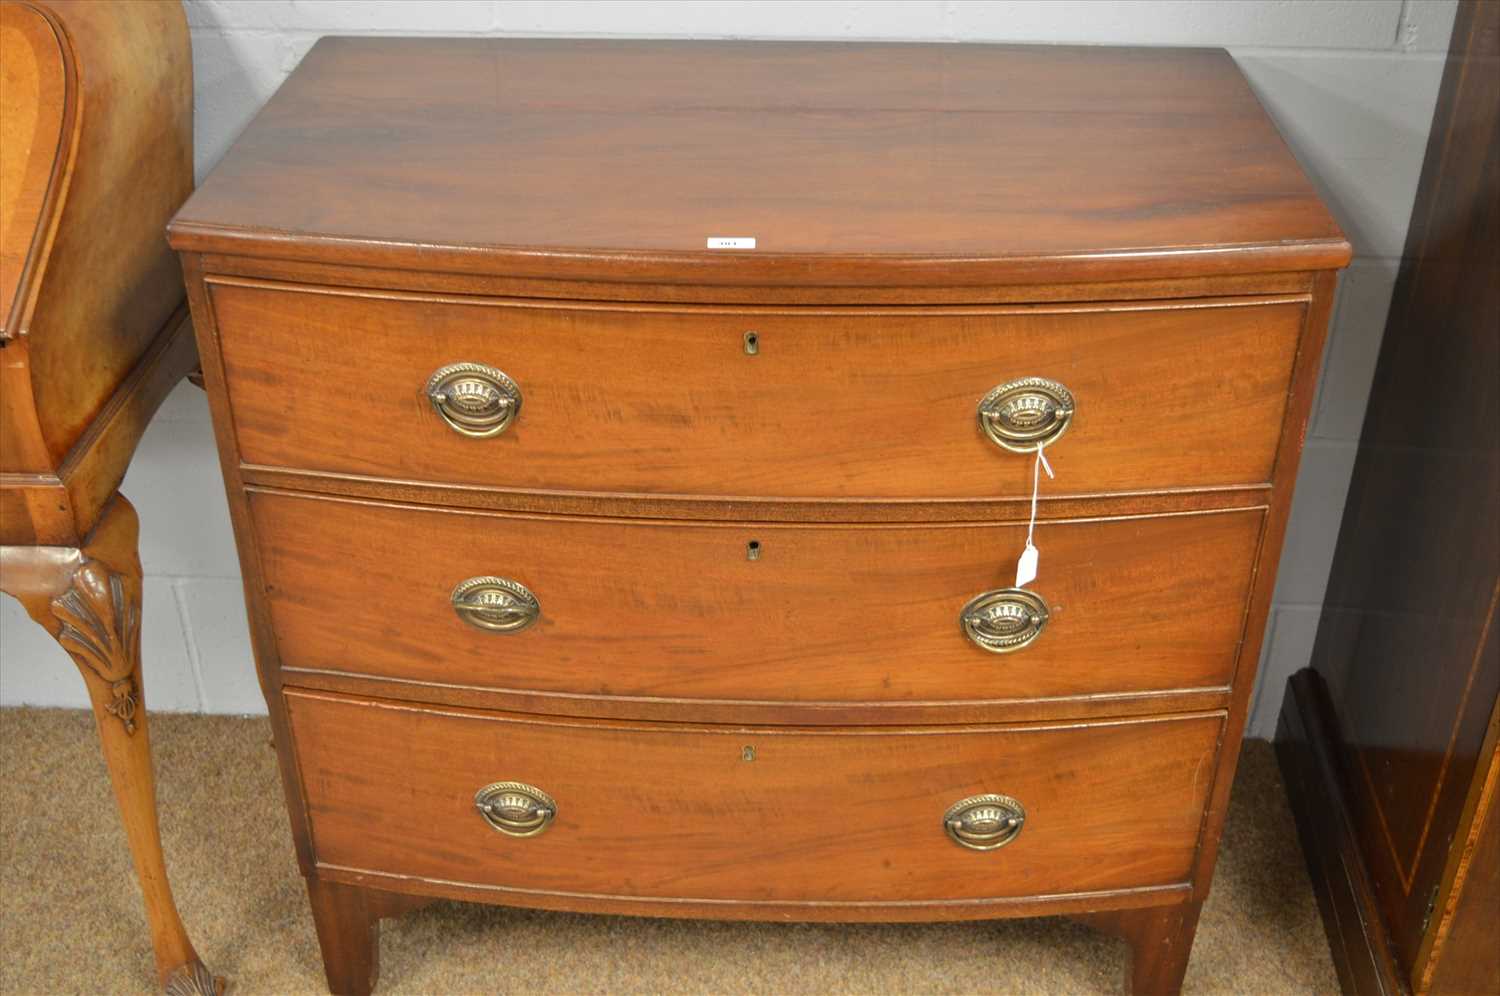 Lot 381 - Chest of drawers